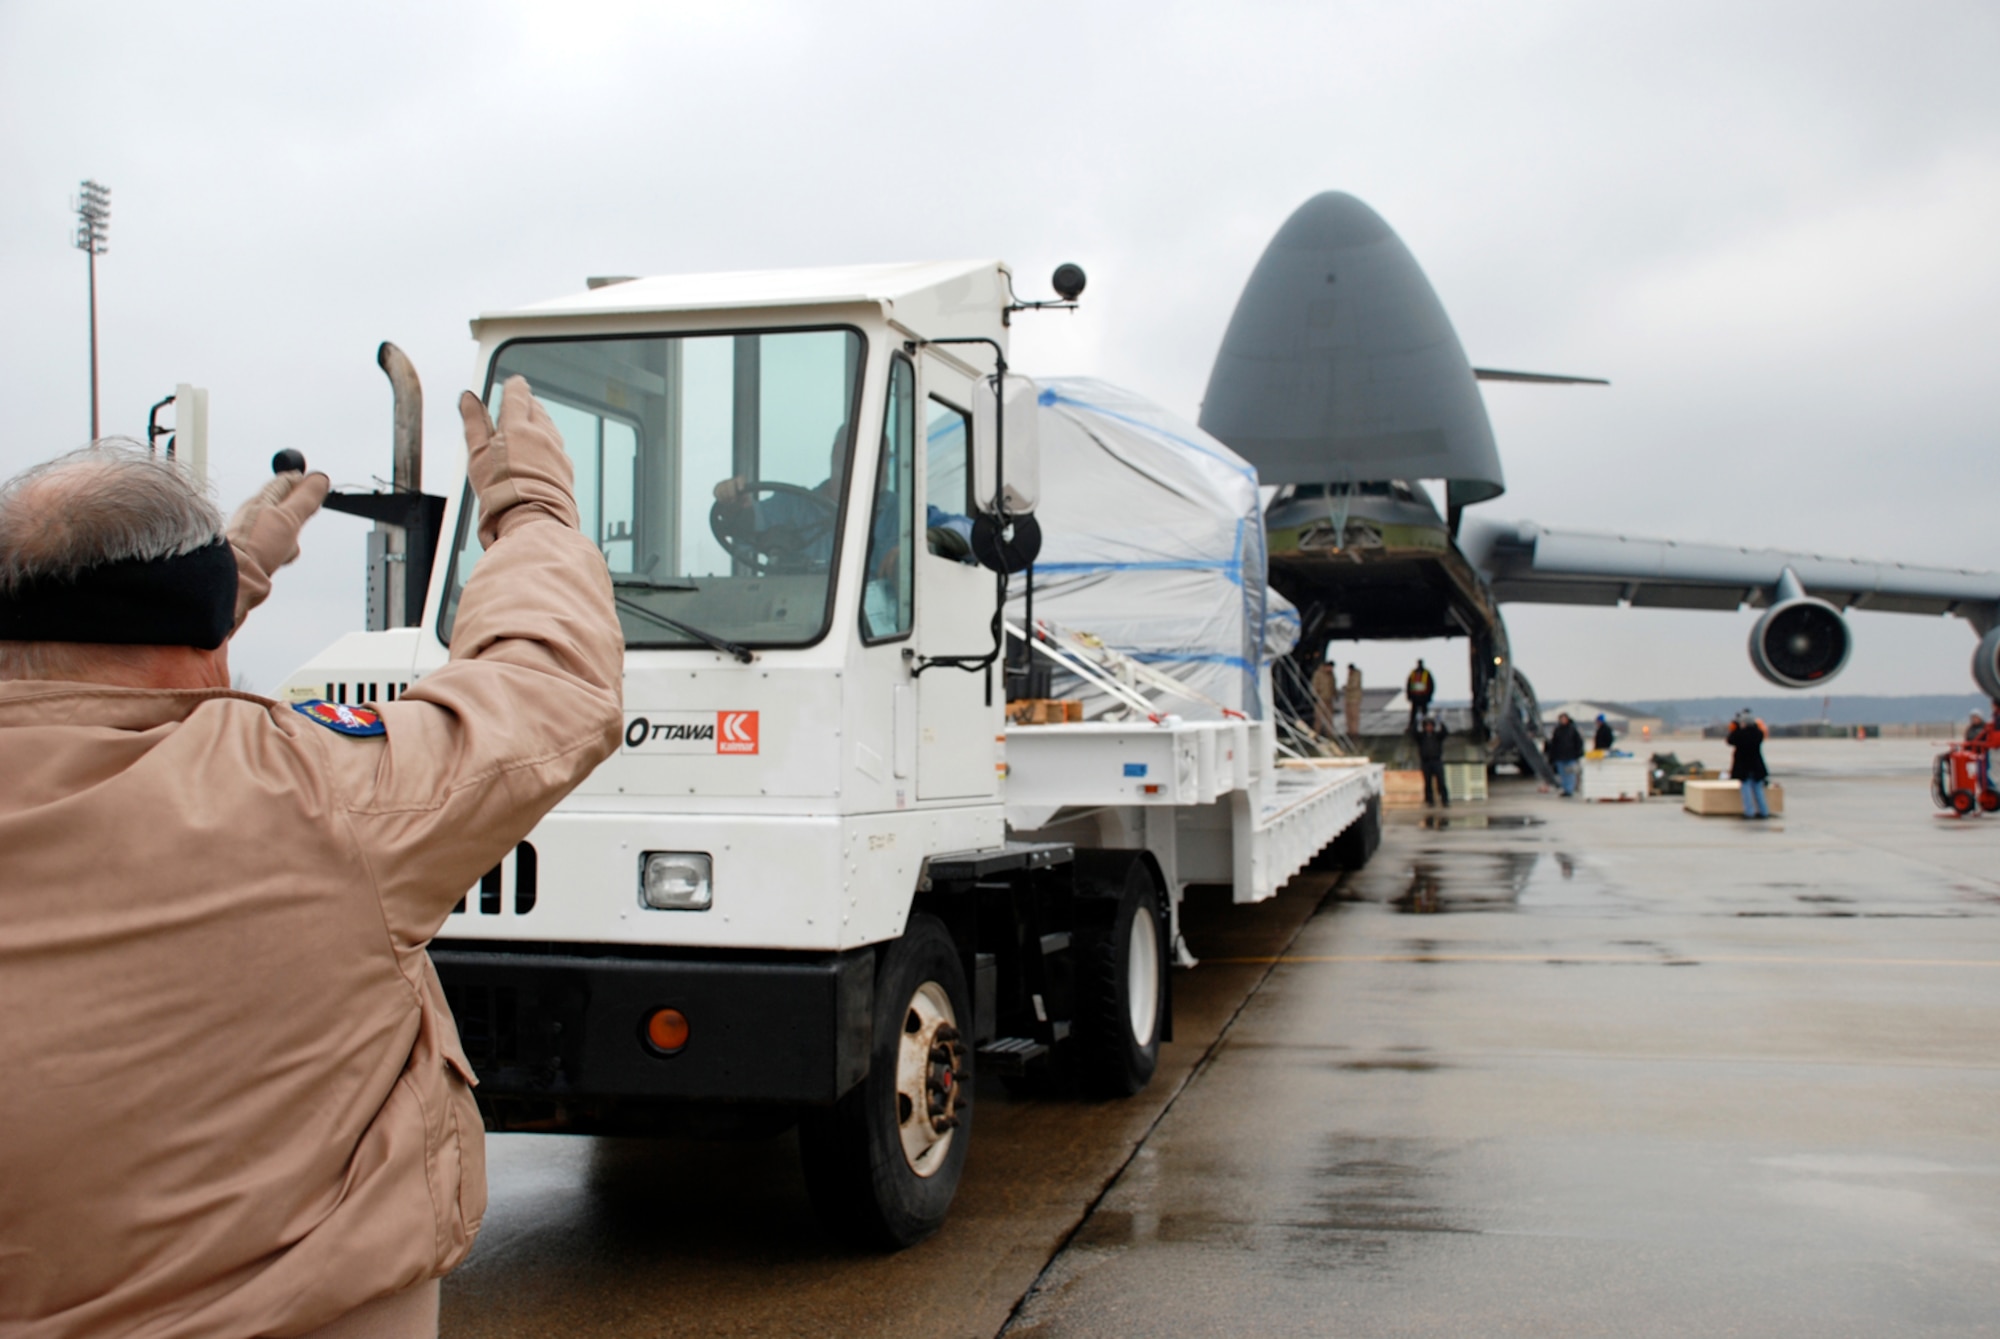 167th Airlift Wing Loadmaster, MSgt Douglas Stroz, directs the loading of an Ares 1-X test crew module and launch abort system onto a C-5 aircraft at Langley Air Force Base, Va, on January 27, 2009. The crew delivered the cargo to the Kennedy Space Center in Florida the following day. The ARES 1-X test crew module and launch abort system is part of a complex flight test program which will eventually lead to the launch of the Orion spacecraft in early 2013.
(U.S. Air Force Photo by COL Roger Nye)